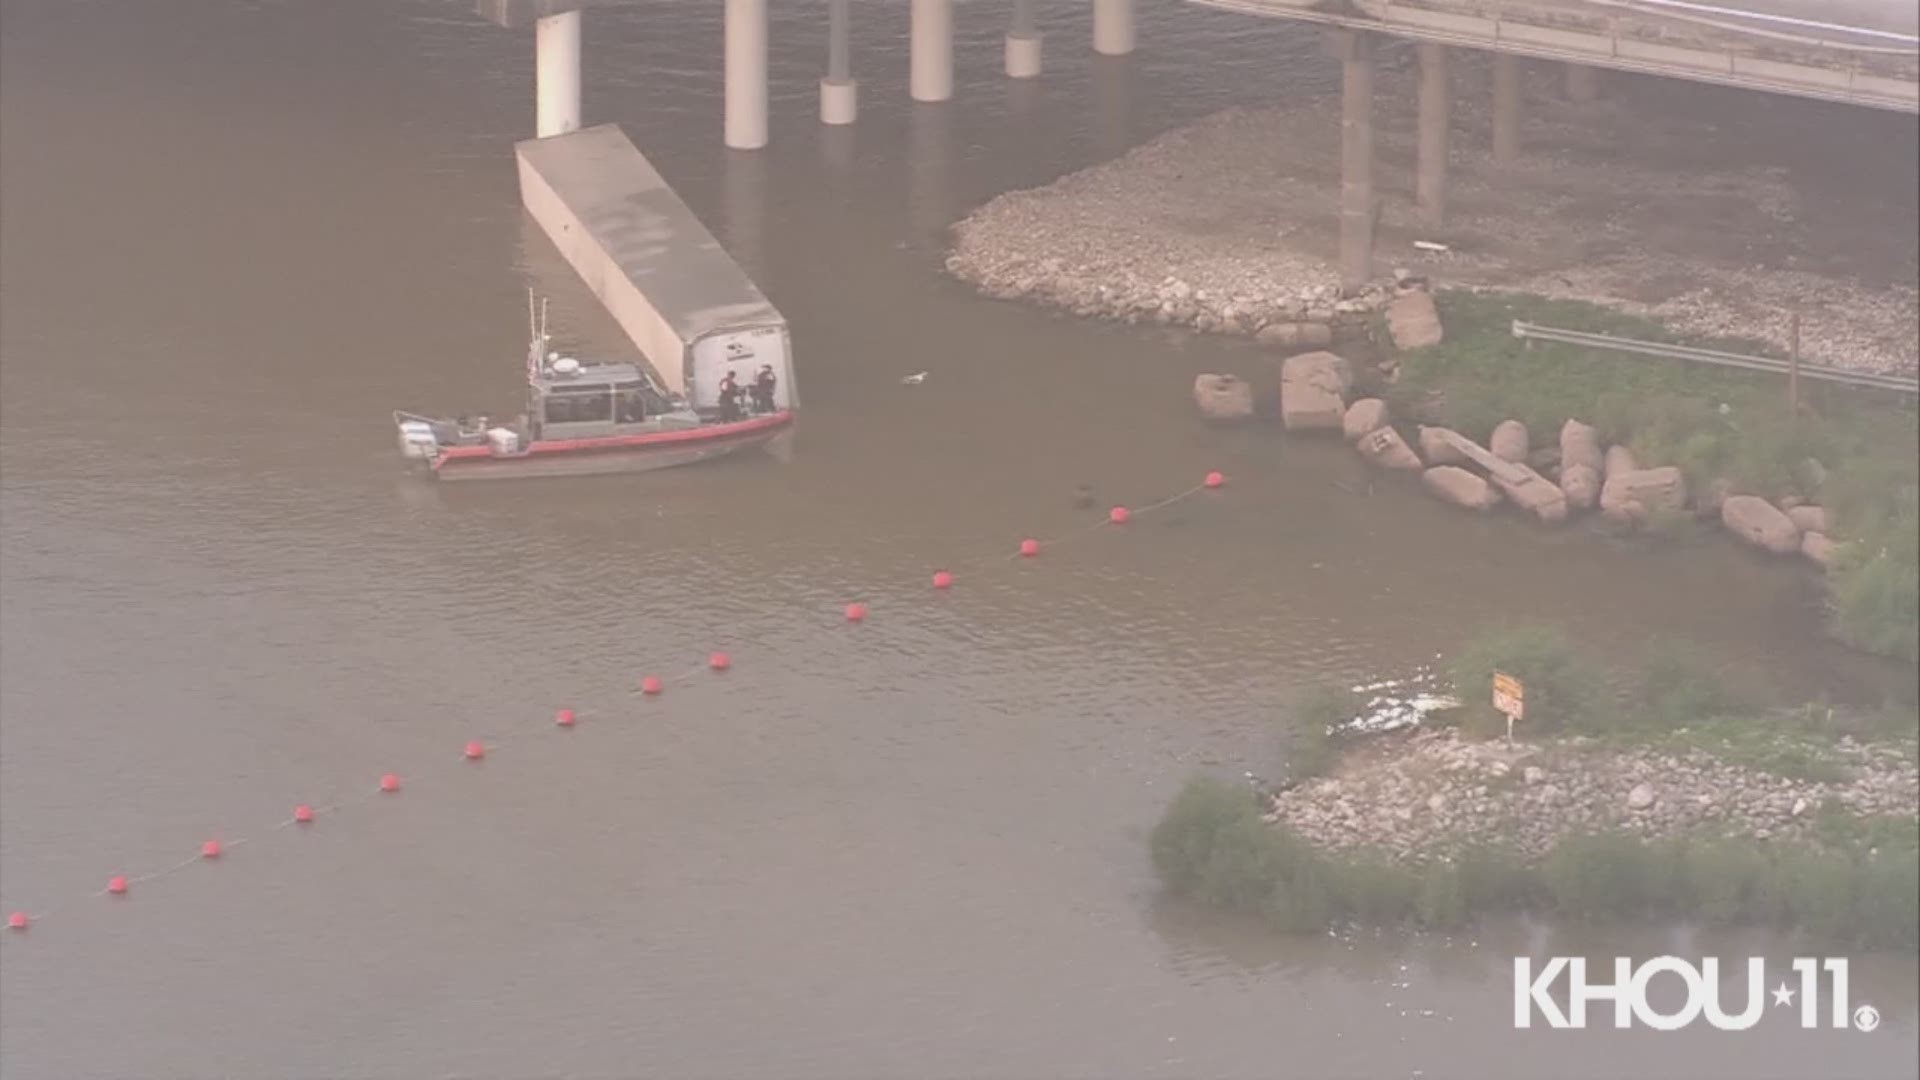 The I-10 East Freeway is closed heading west/inbound after an 18-wheeler went off the bridge into the San Jacinto River early Thursday, according to Harris County Sheriff Ed Gonzalez.